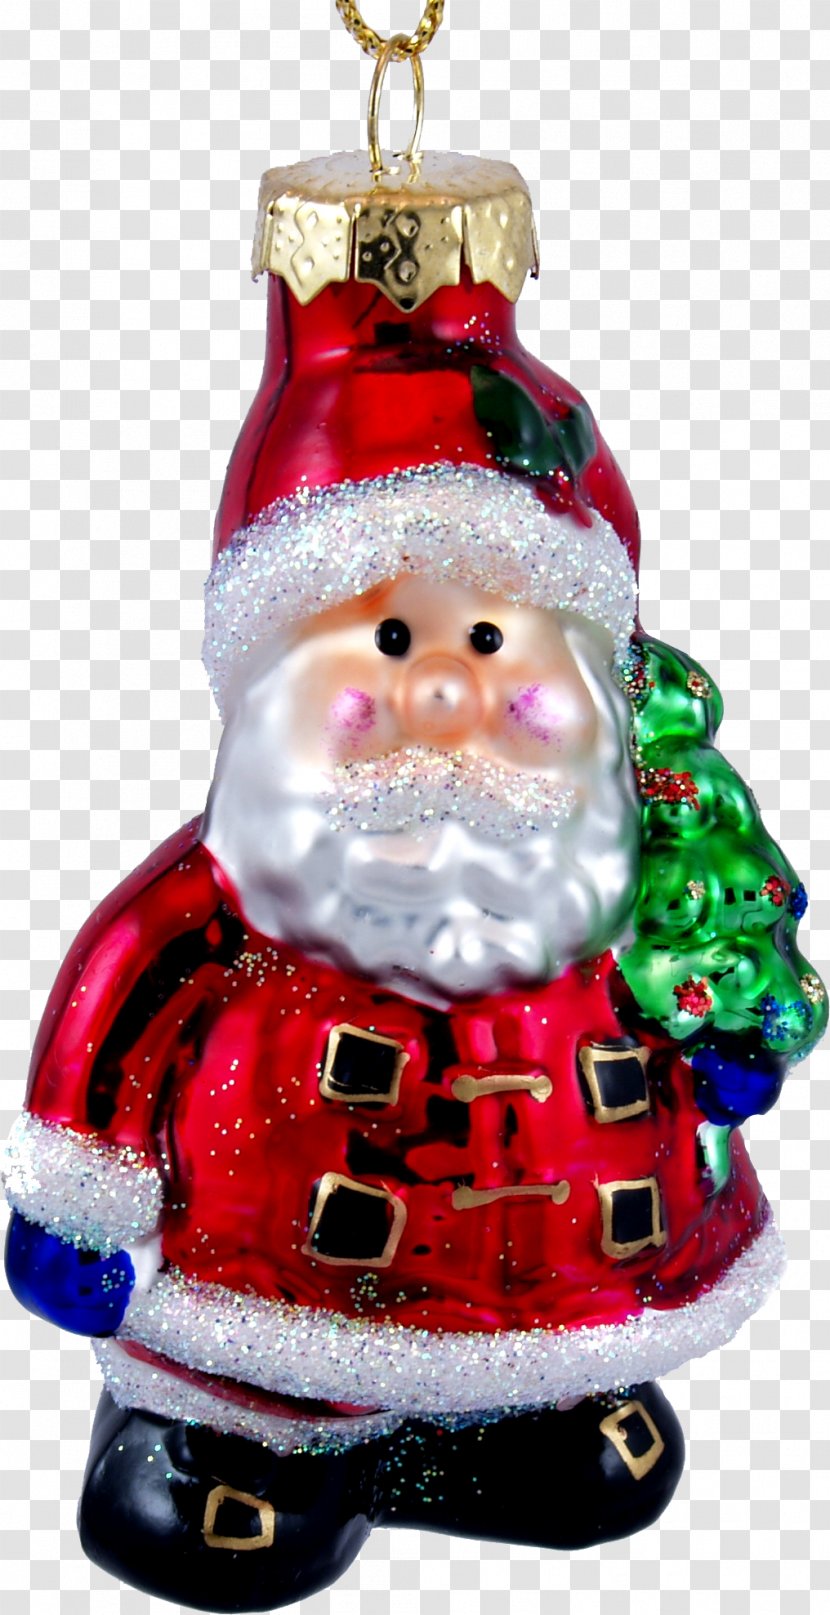 Santa Claus Christmas Ornament Ded Moroz New Year - Mrs - Snowman Transparent PNG